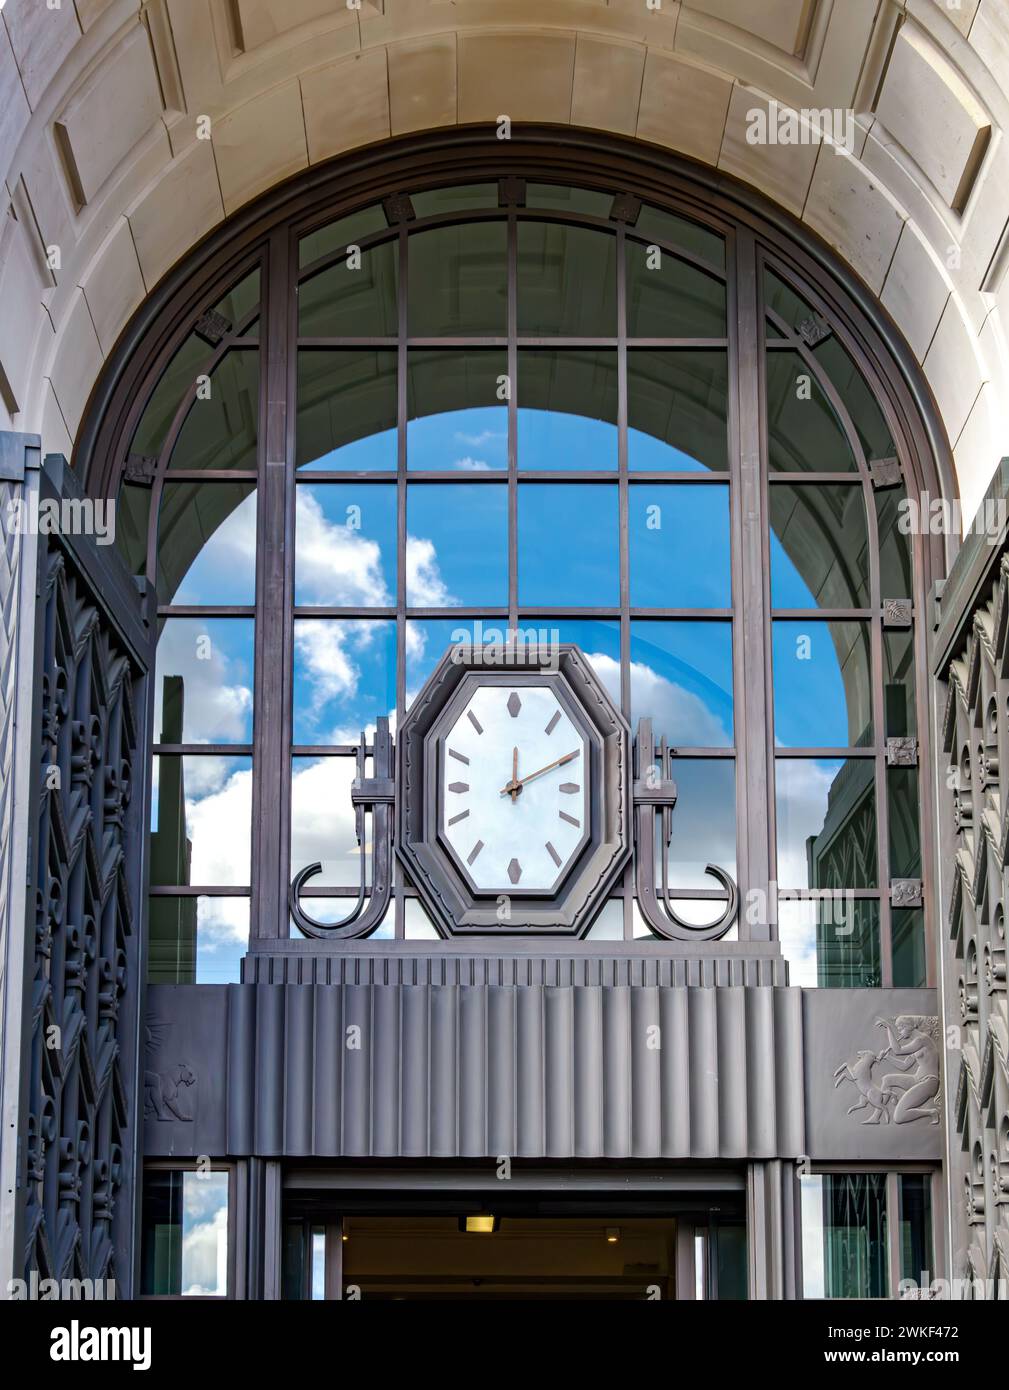 Art Deco style with clock and pewter panels by Eric Gill in the entrance arch to Unilever House by Blackfriars Bridge in the City of London UK Stock Photo